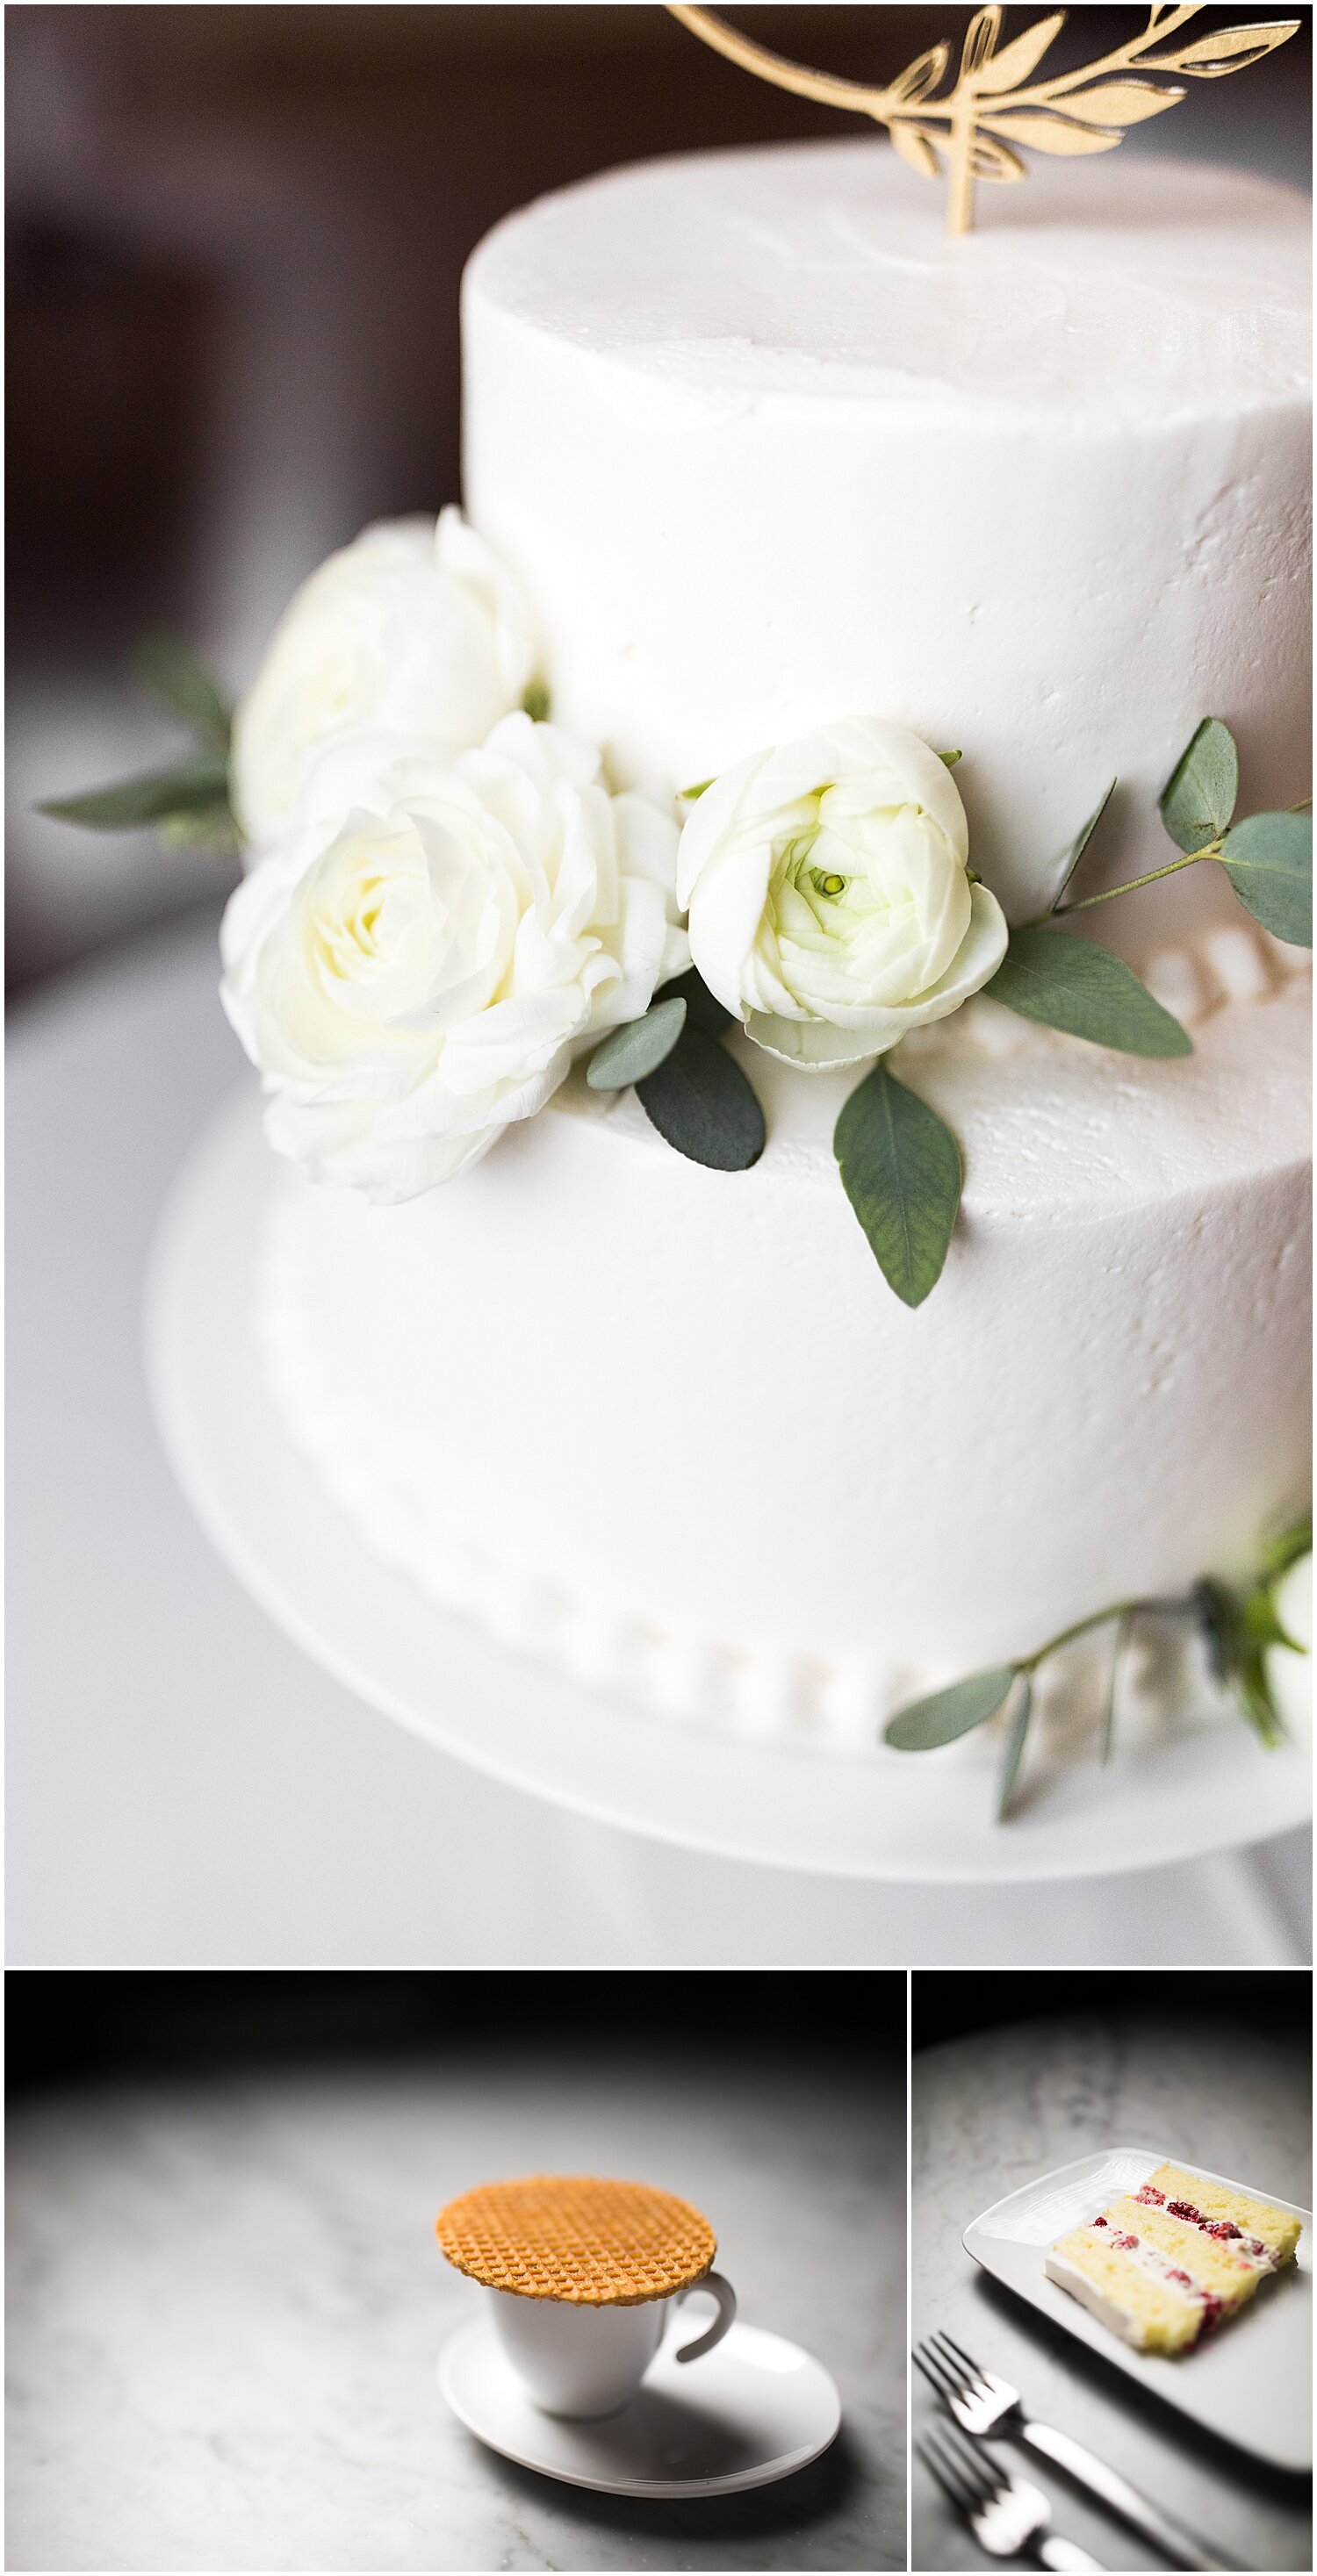  simple white wedding cake and desserts 